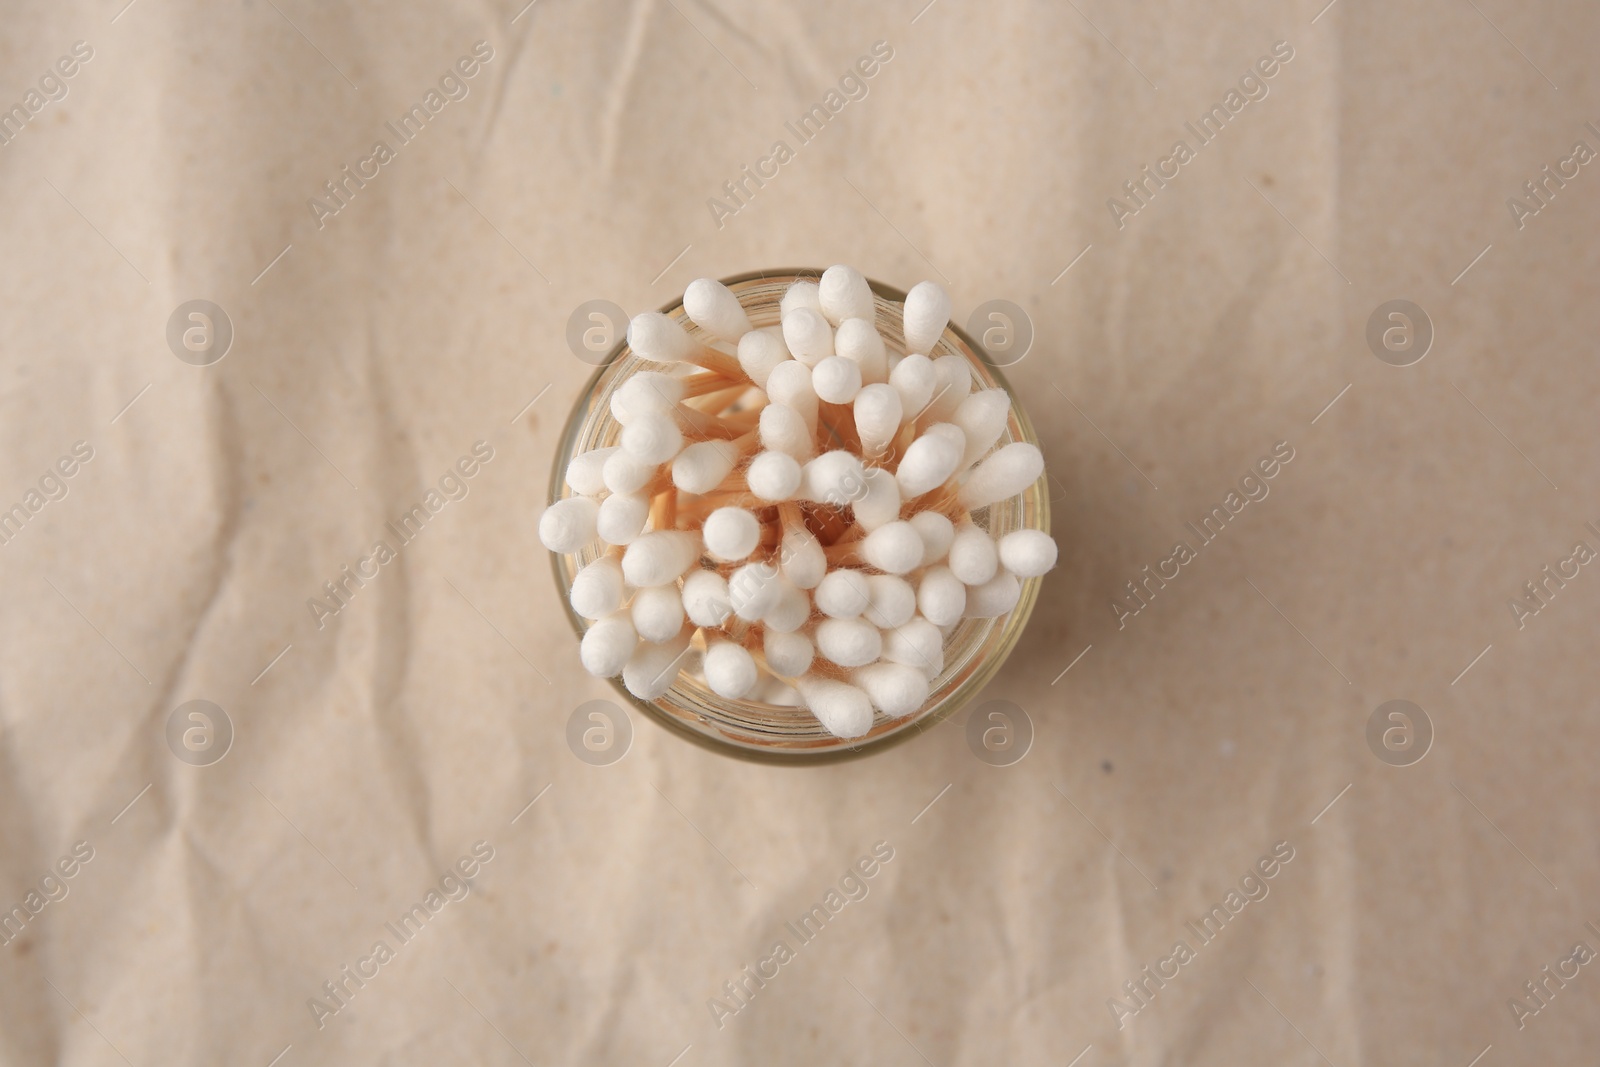 Photo of Jar of clean cotton buds on crumpled paper, top view